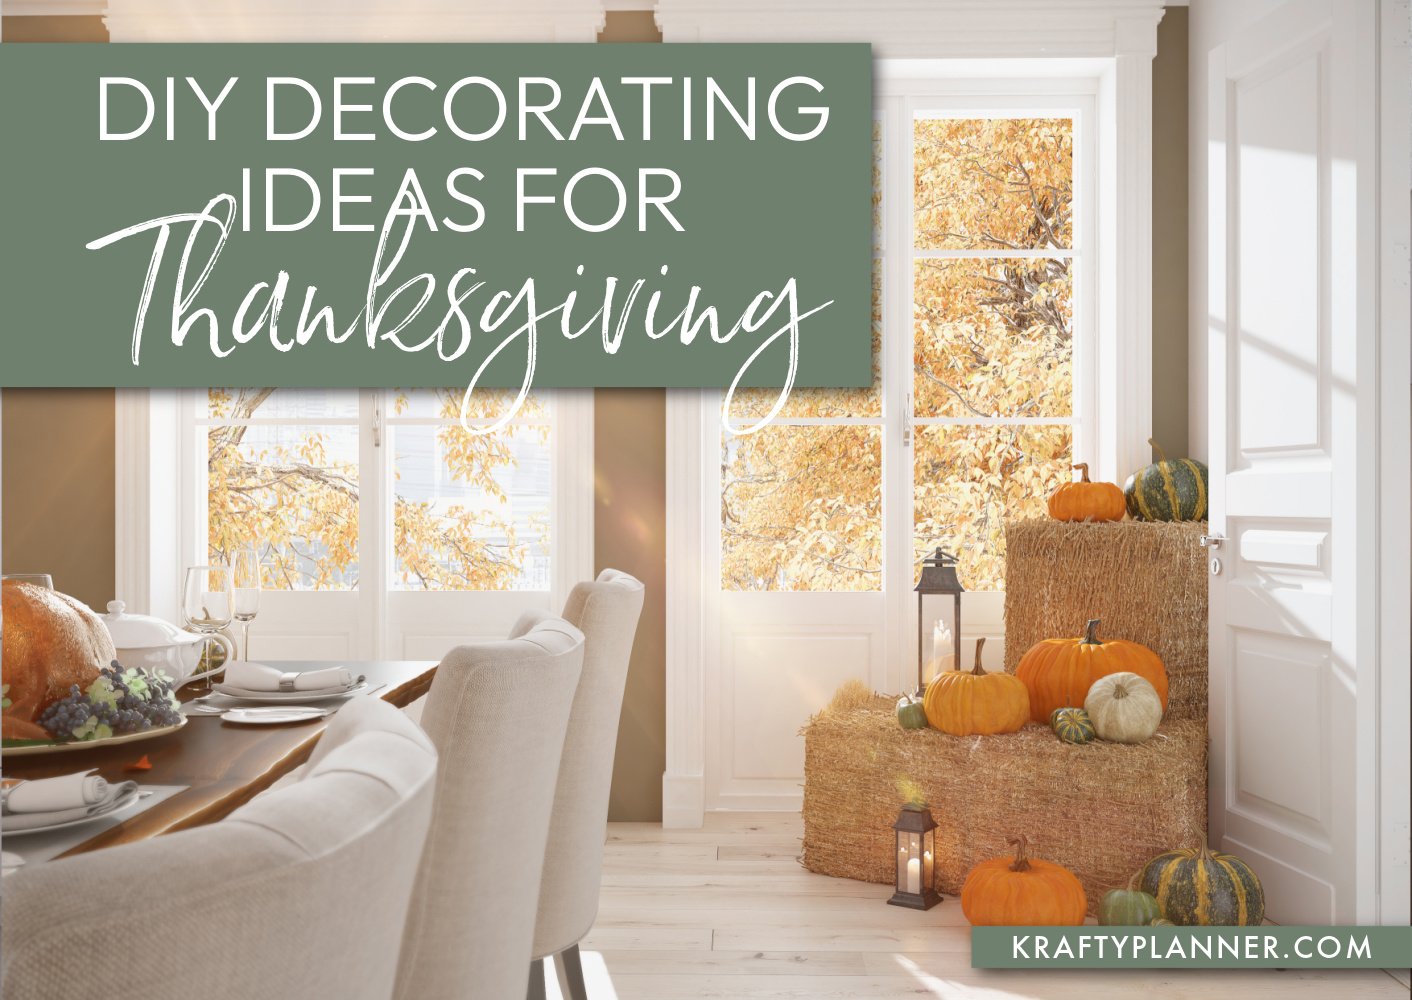 DIY Decorating Ideas for a Cozy Thanksgiving